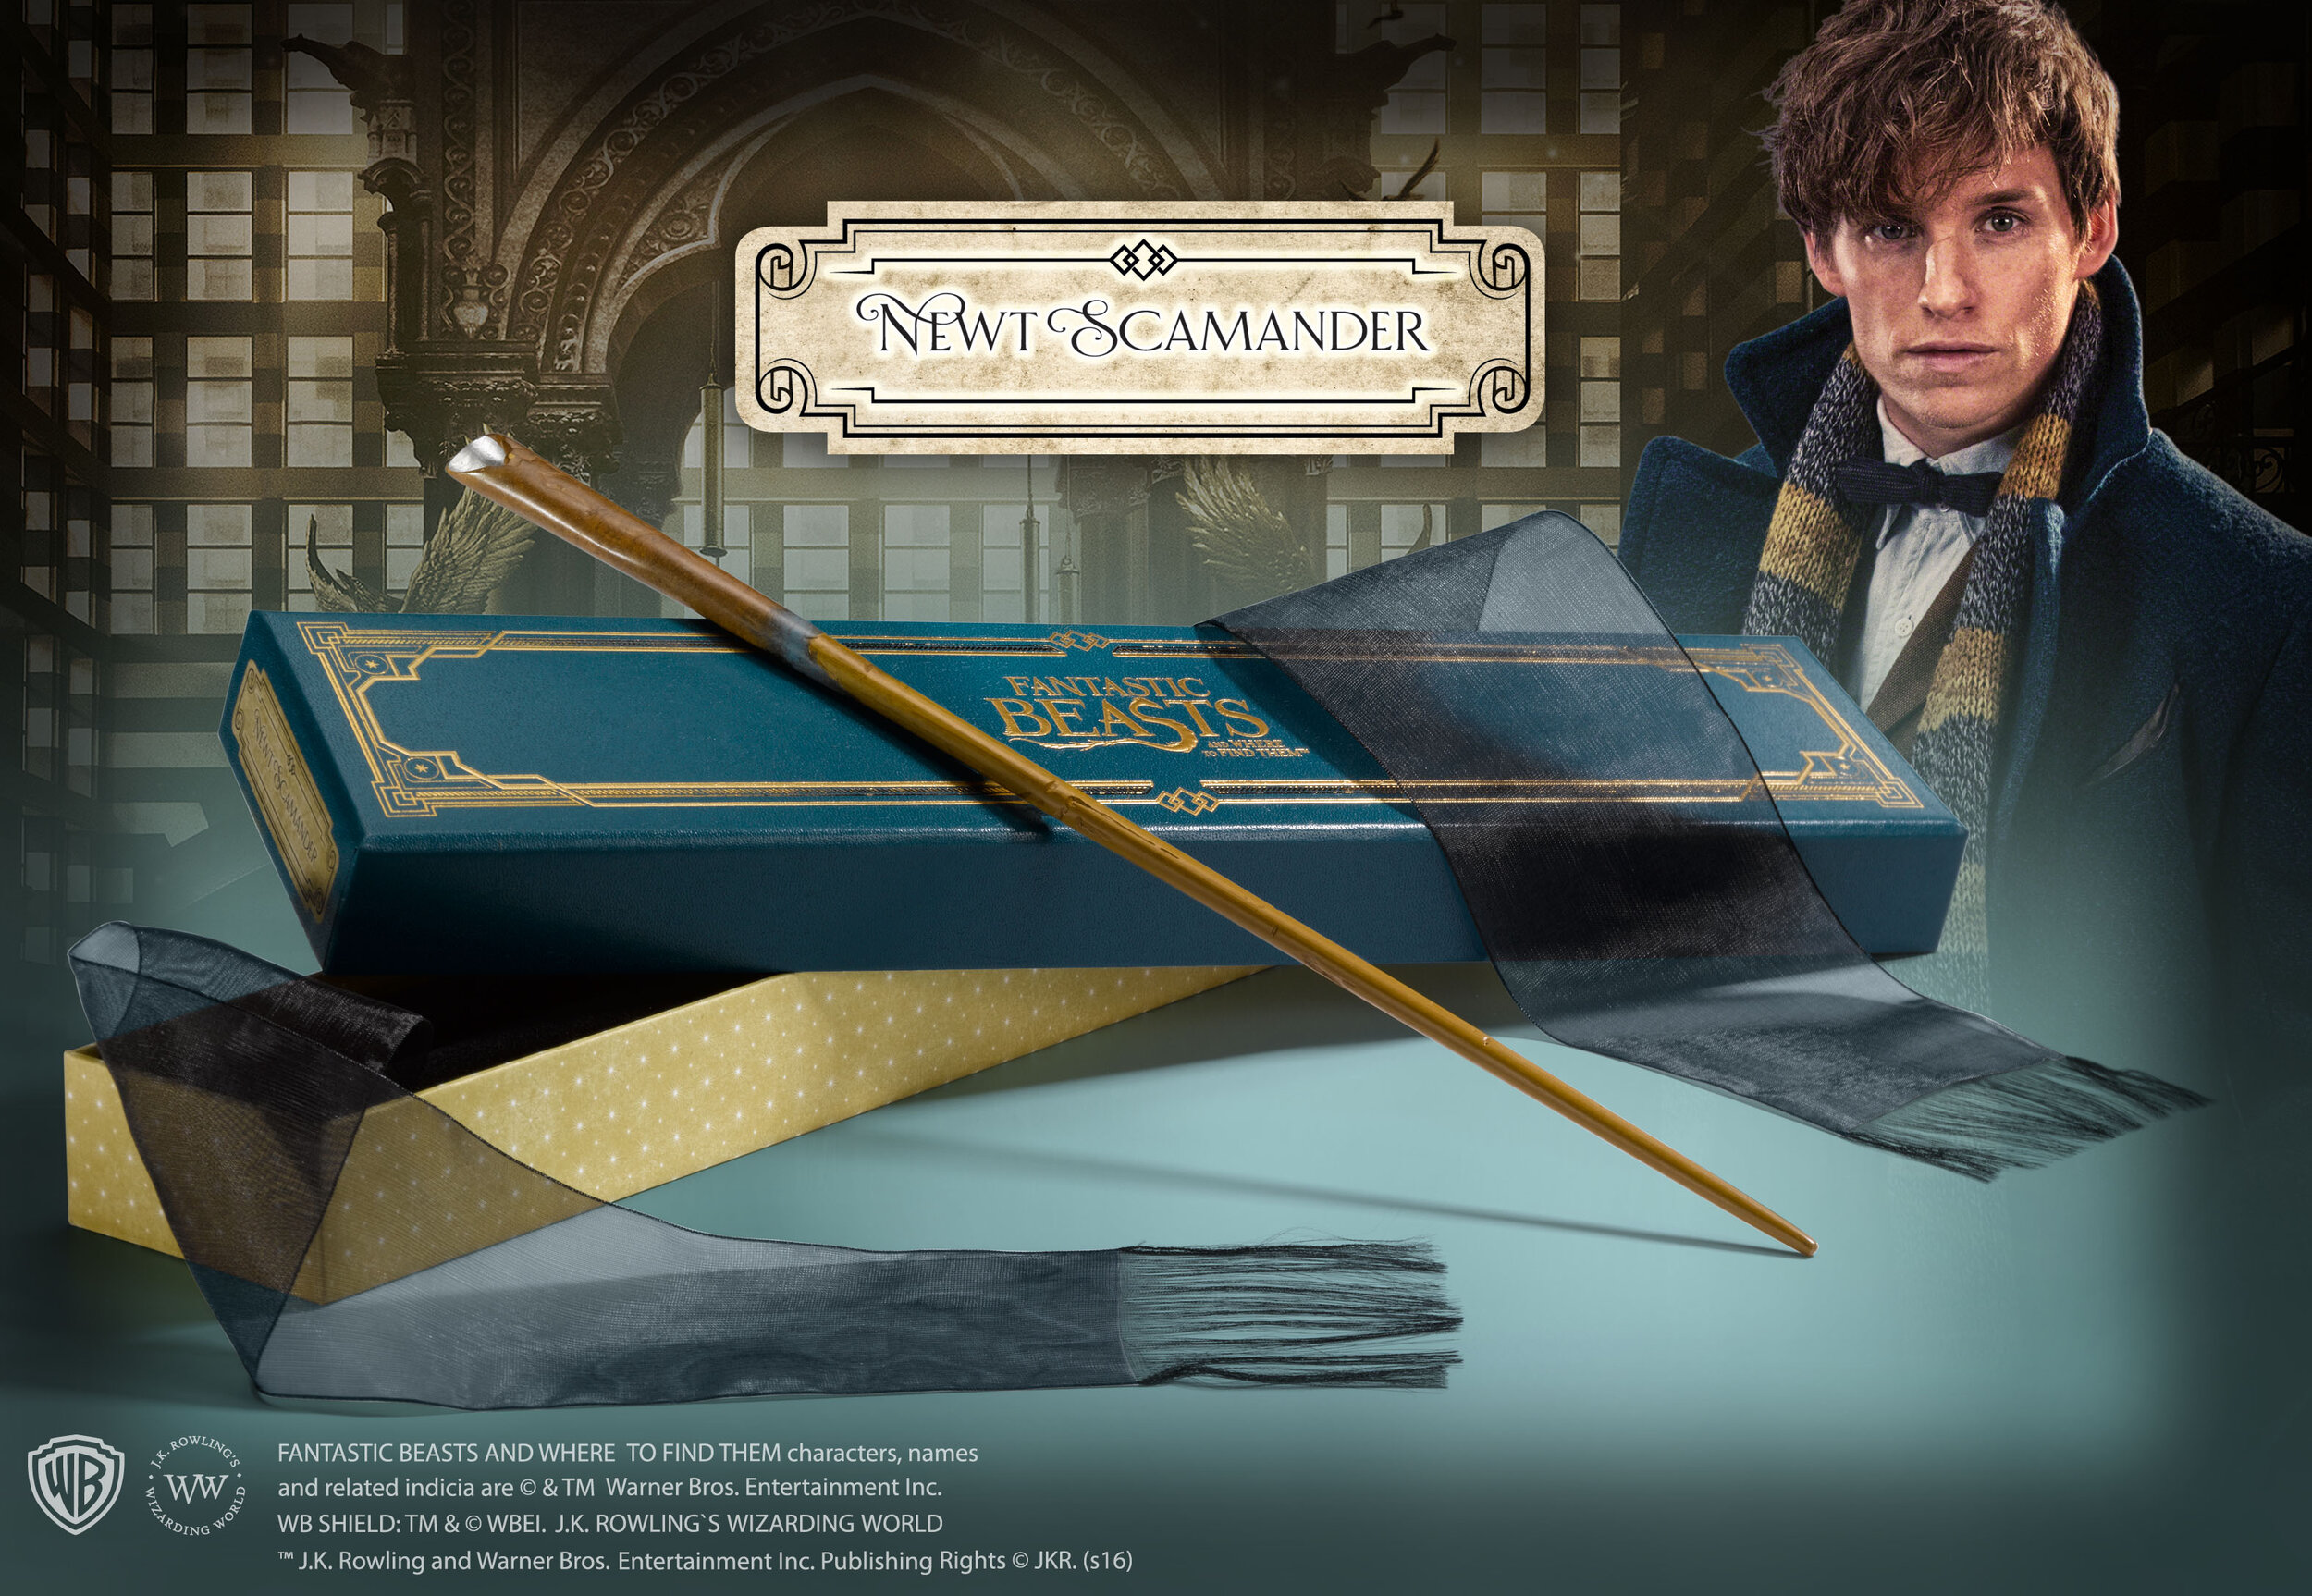 Corvus Lestrange Wand Prop Replica from Fantastic Beasts And Where To Find Them